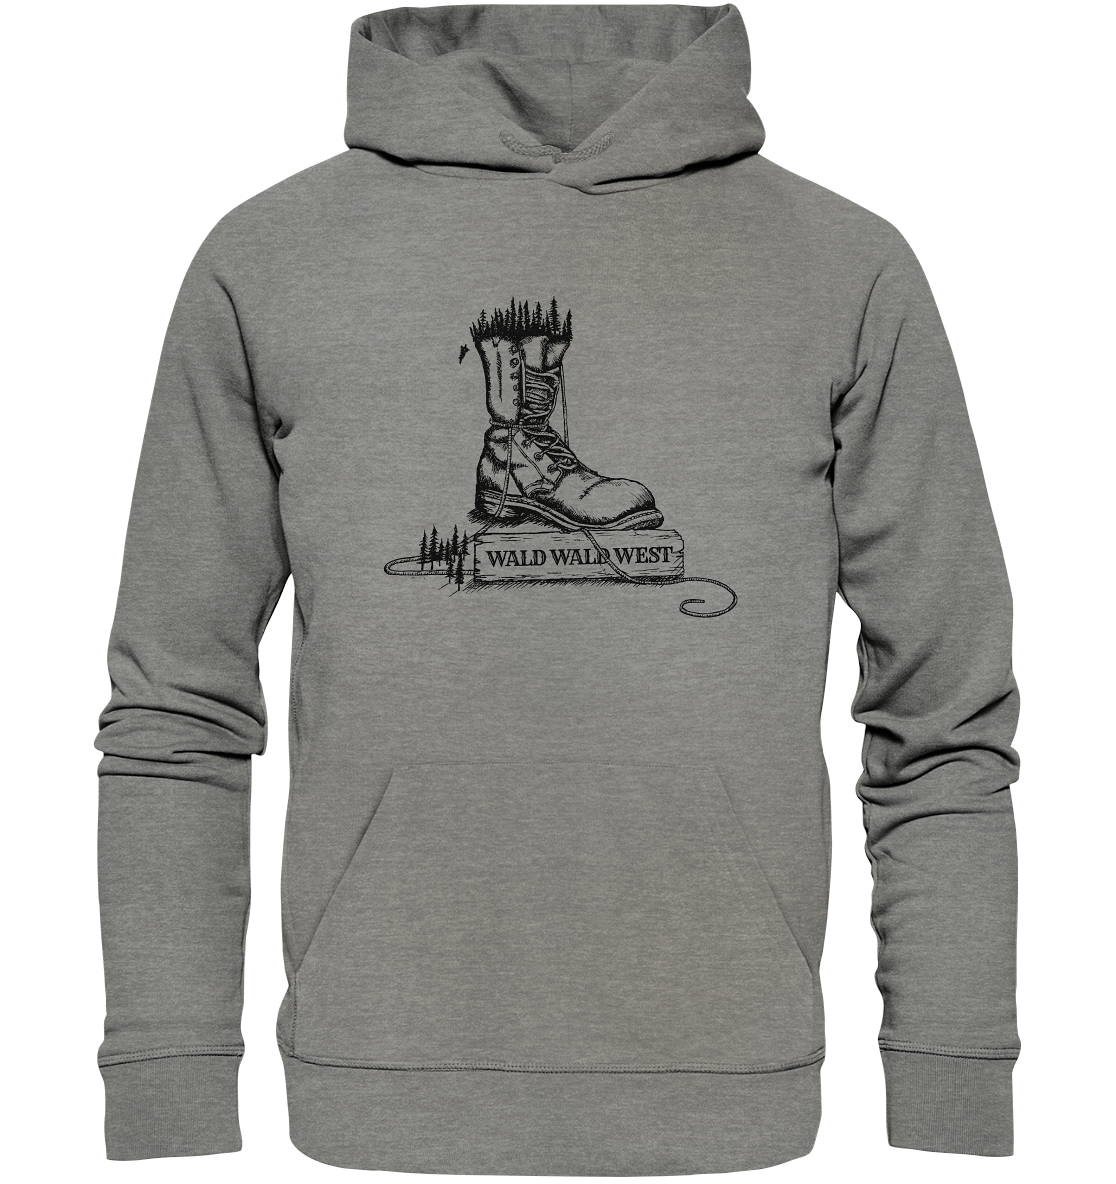 front-organic-hoodie-818381-1116x.png